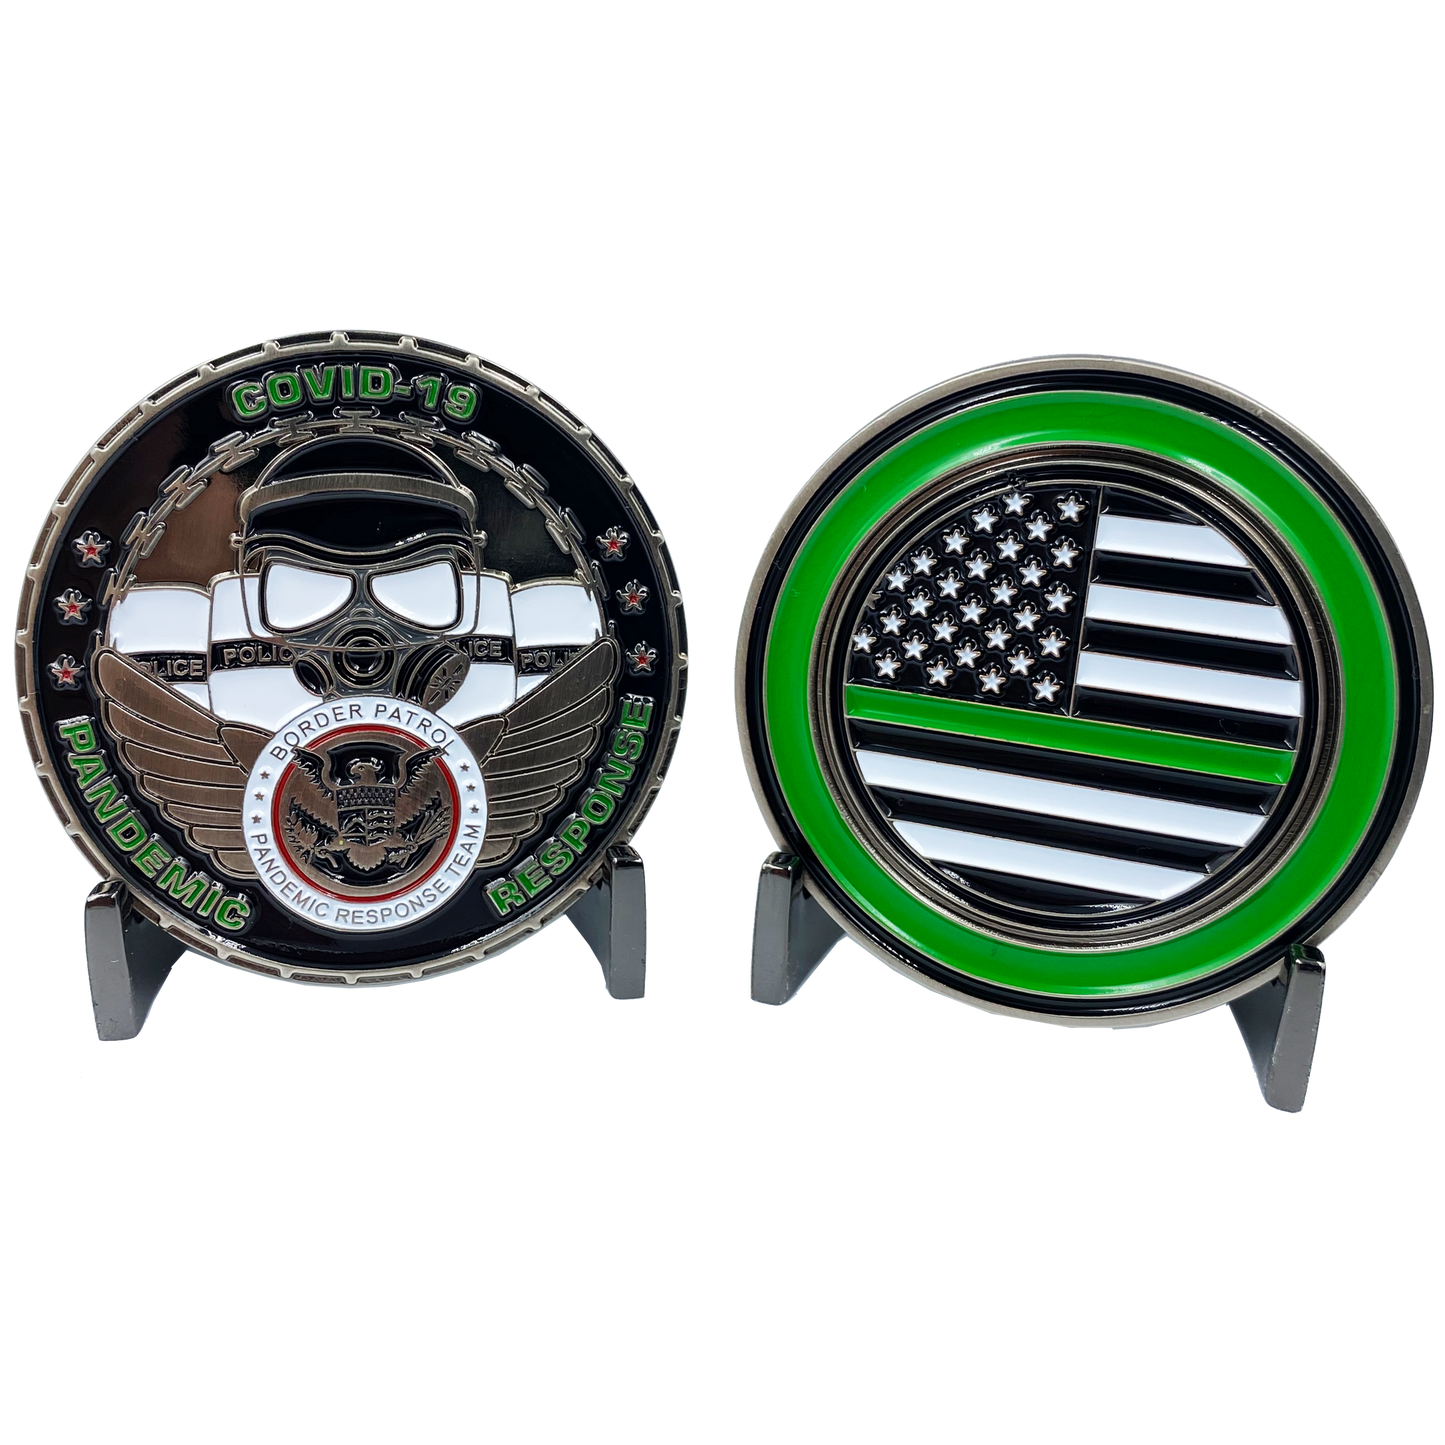 CL4-15 Border Patrol Pandemic Response Team Thin Green Line Police Challenge Coin CBP